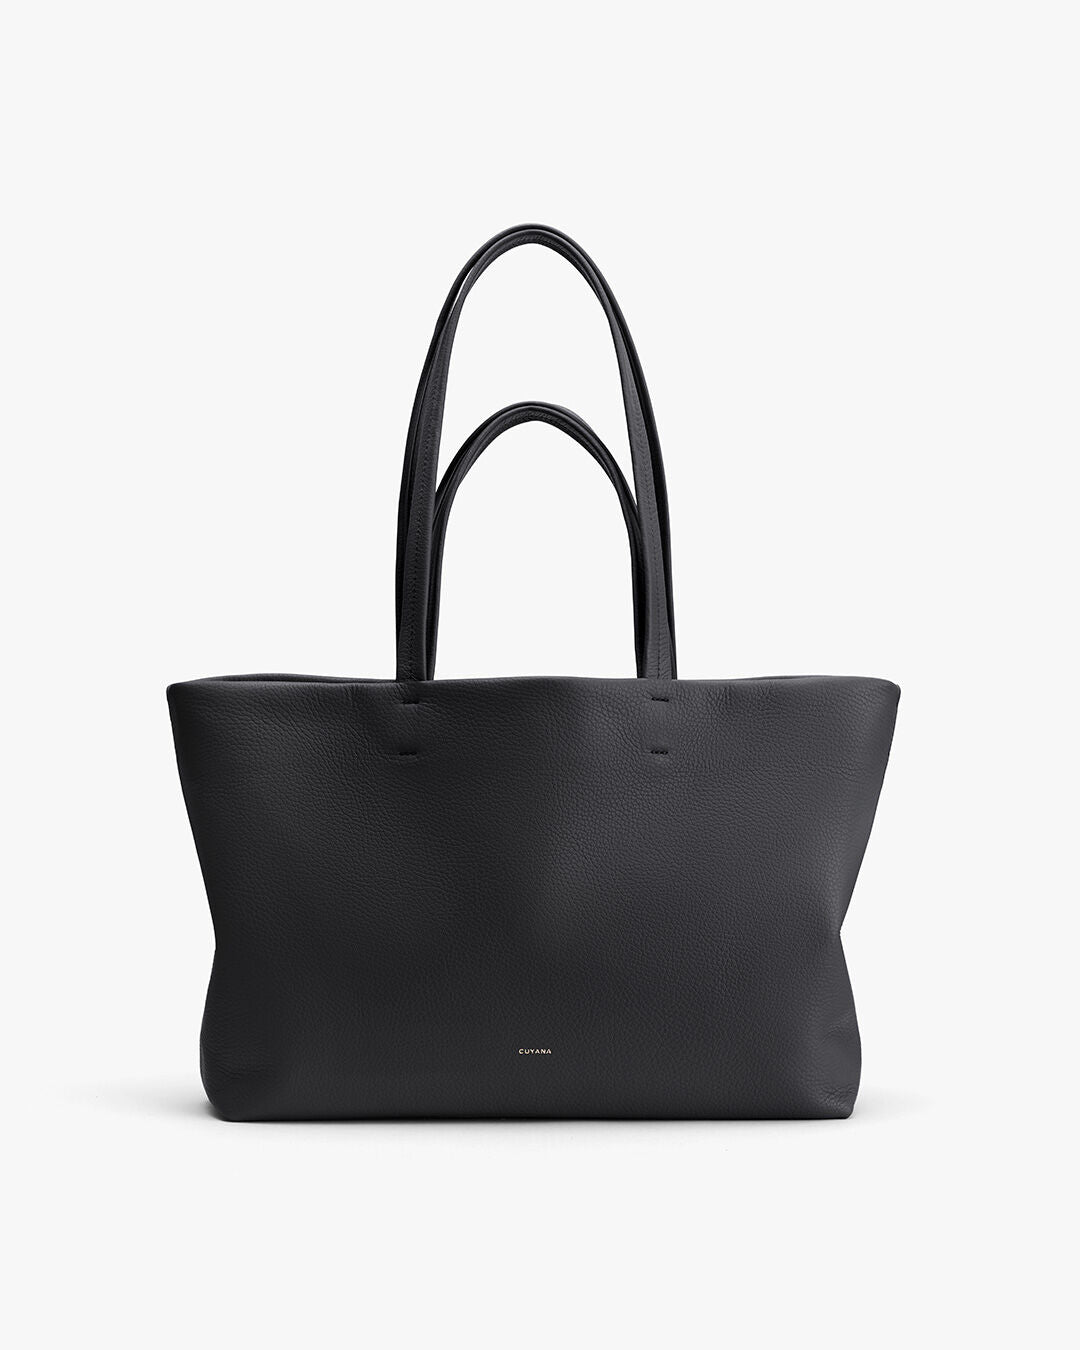 French Connection structured tote bag in black - ShopStyle